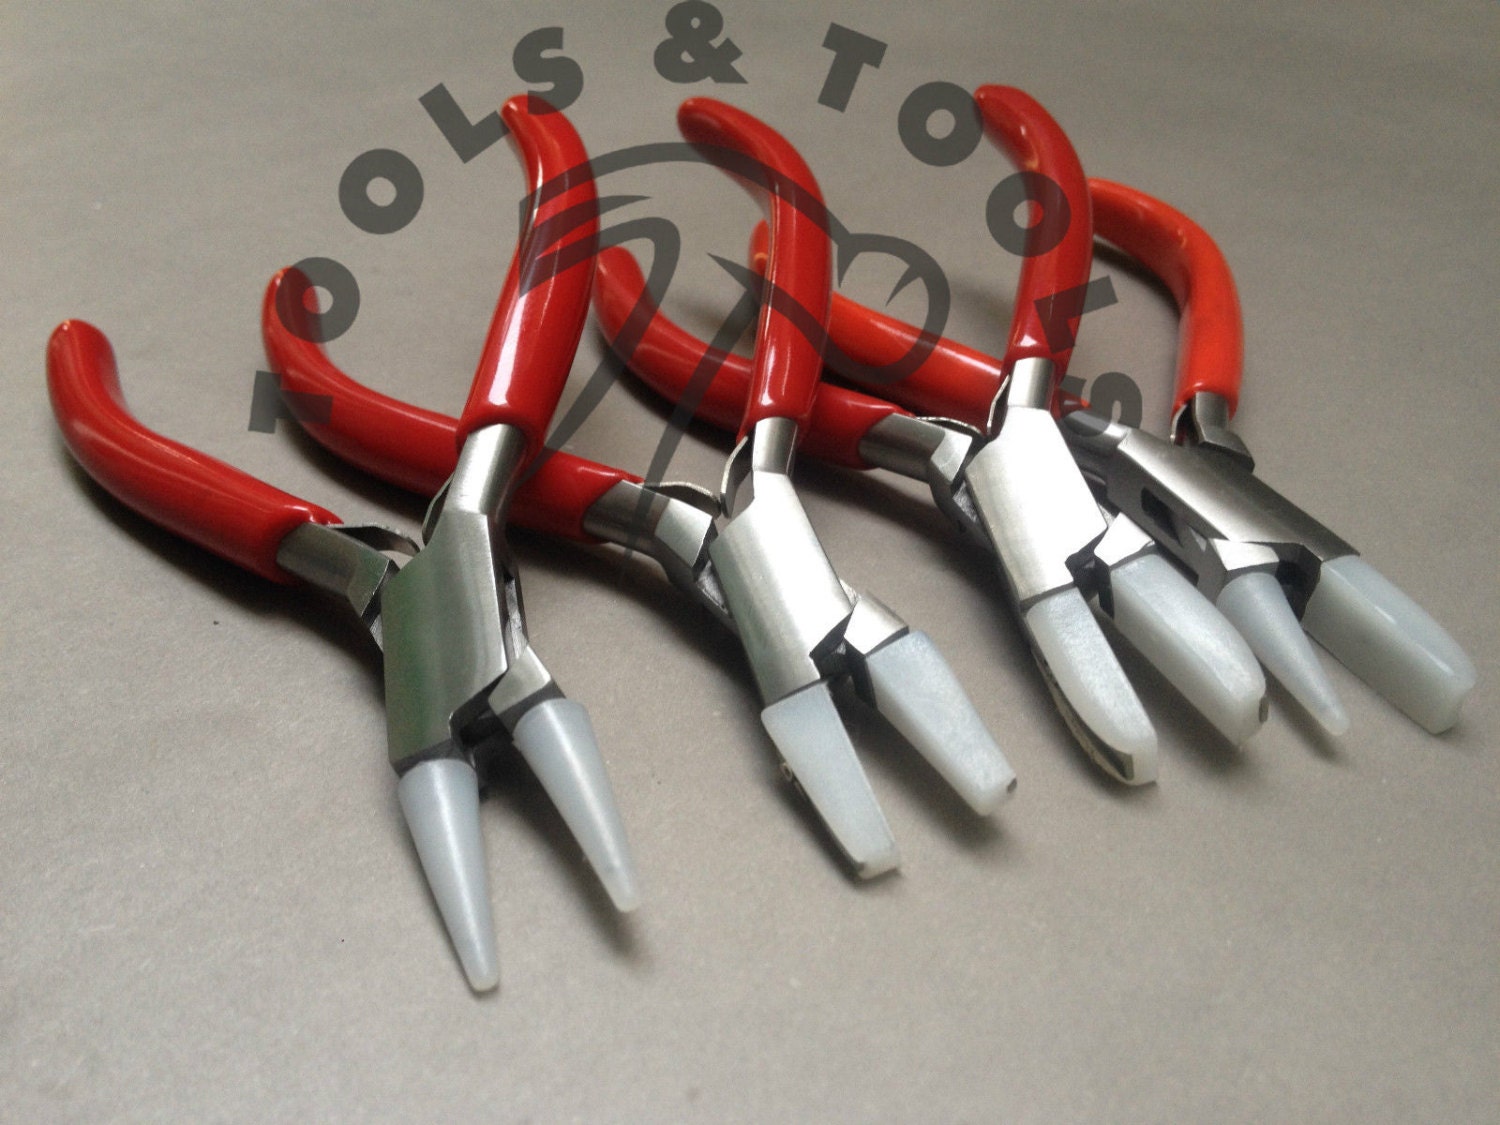  6 Forming Pliers w/Extra Non-Marring Nylon Jaws Jewelry Making  Wire Bending Metal Forming Repair Tool : Arts, Crafts & Sewing